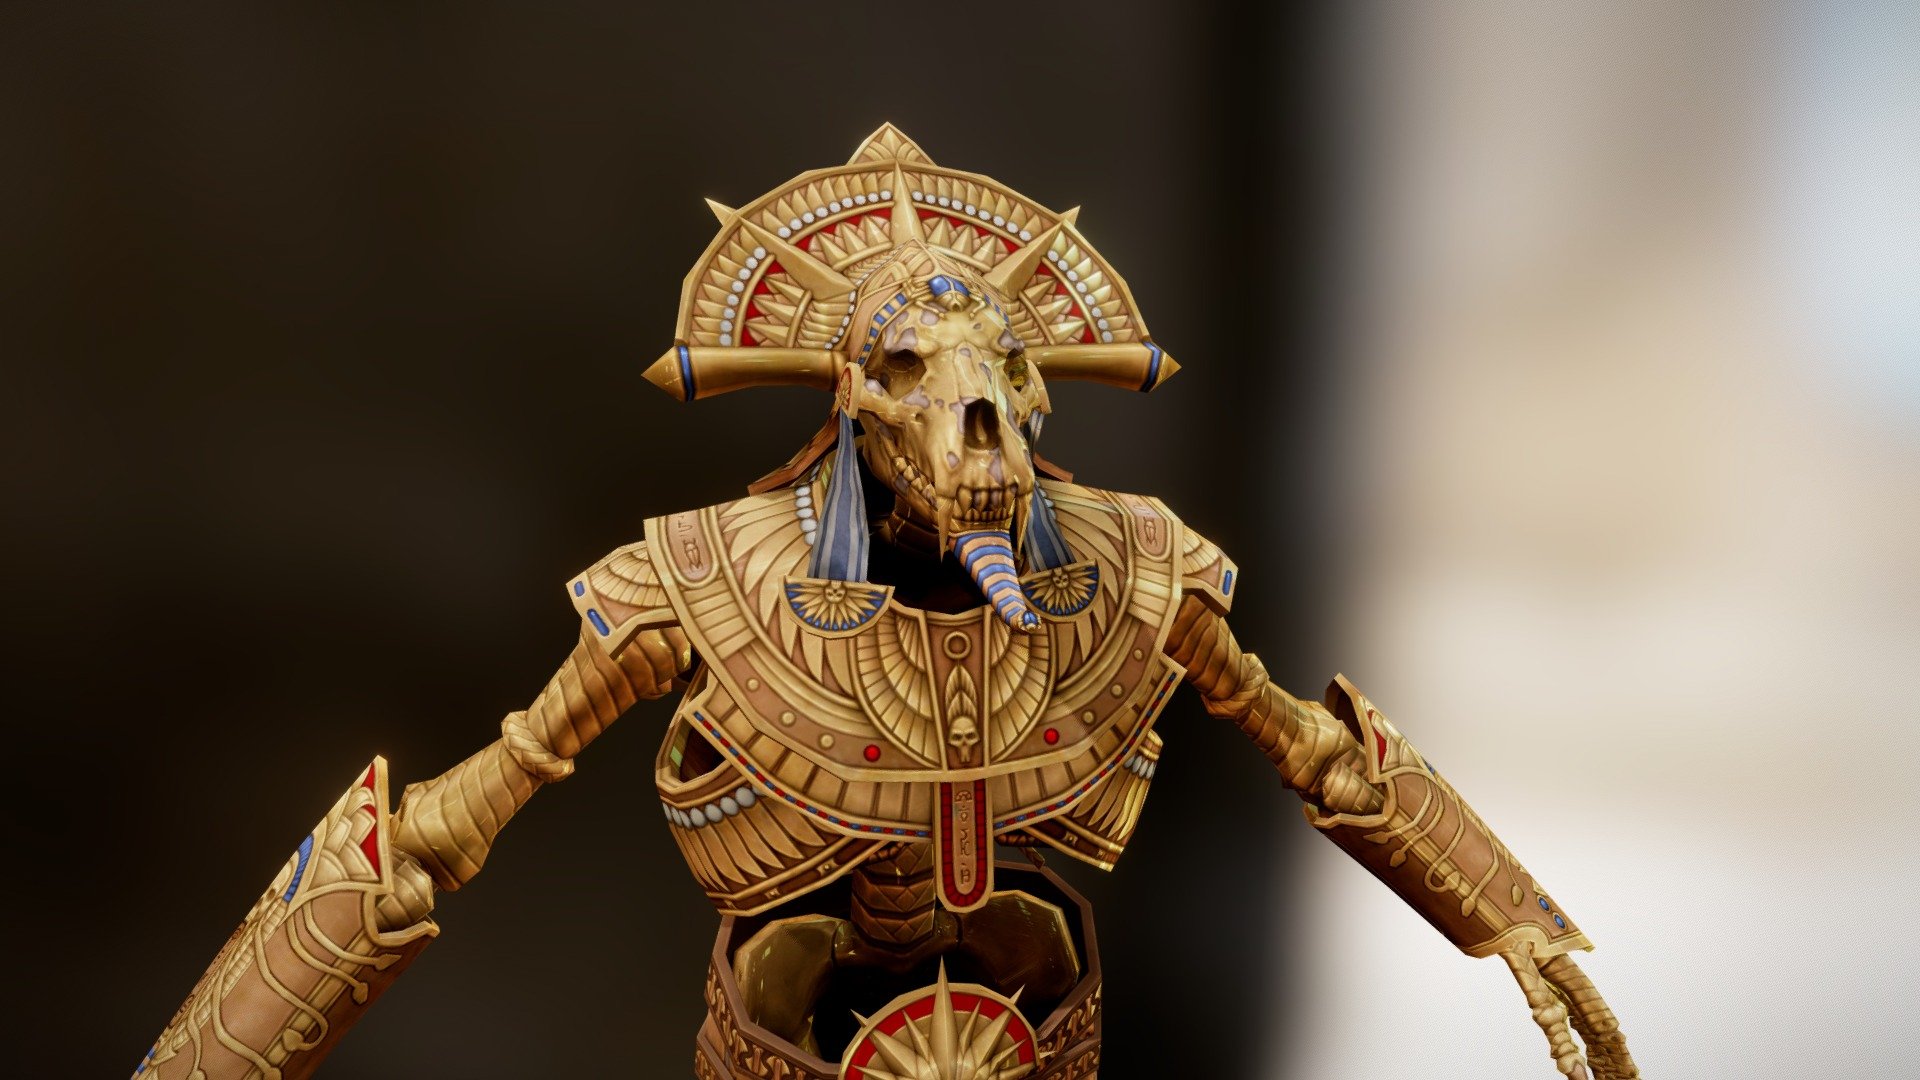 Boss Enemy from Desert region in Warhammer Online. 2009
Modeled in 3ds Max
Textured in Bodypaint 3D and Photoshop - WAR - Golden Guardian - 3D model by Kurtis Smith (@xenobond) 3d model